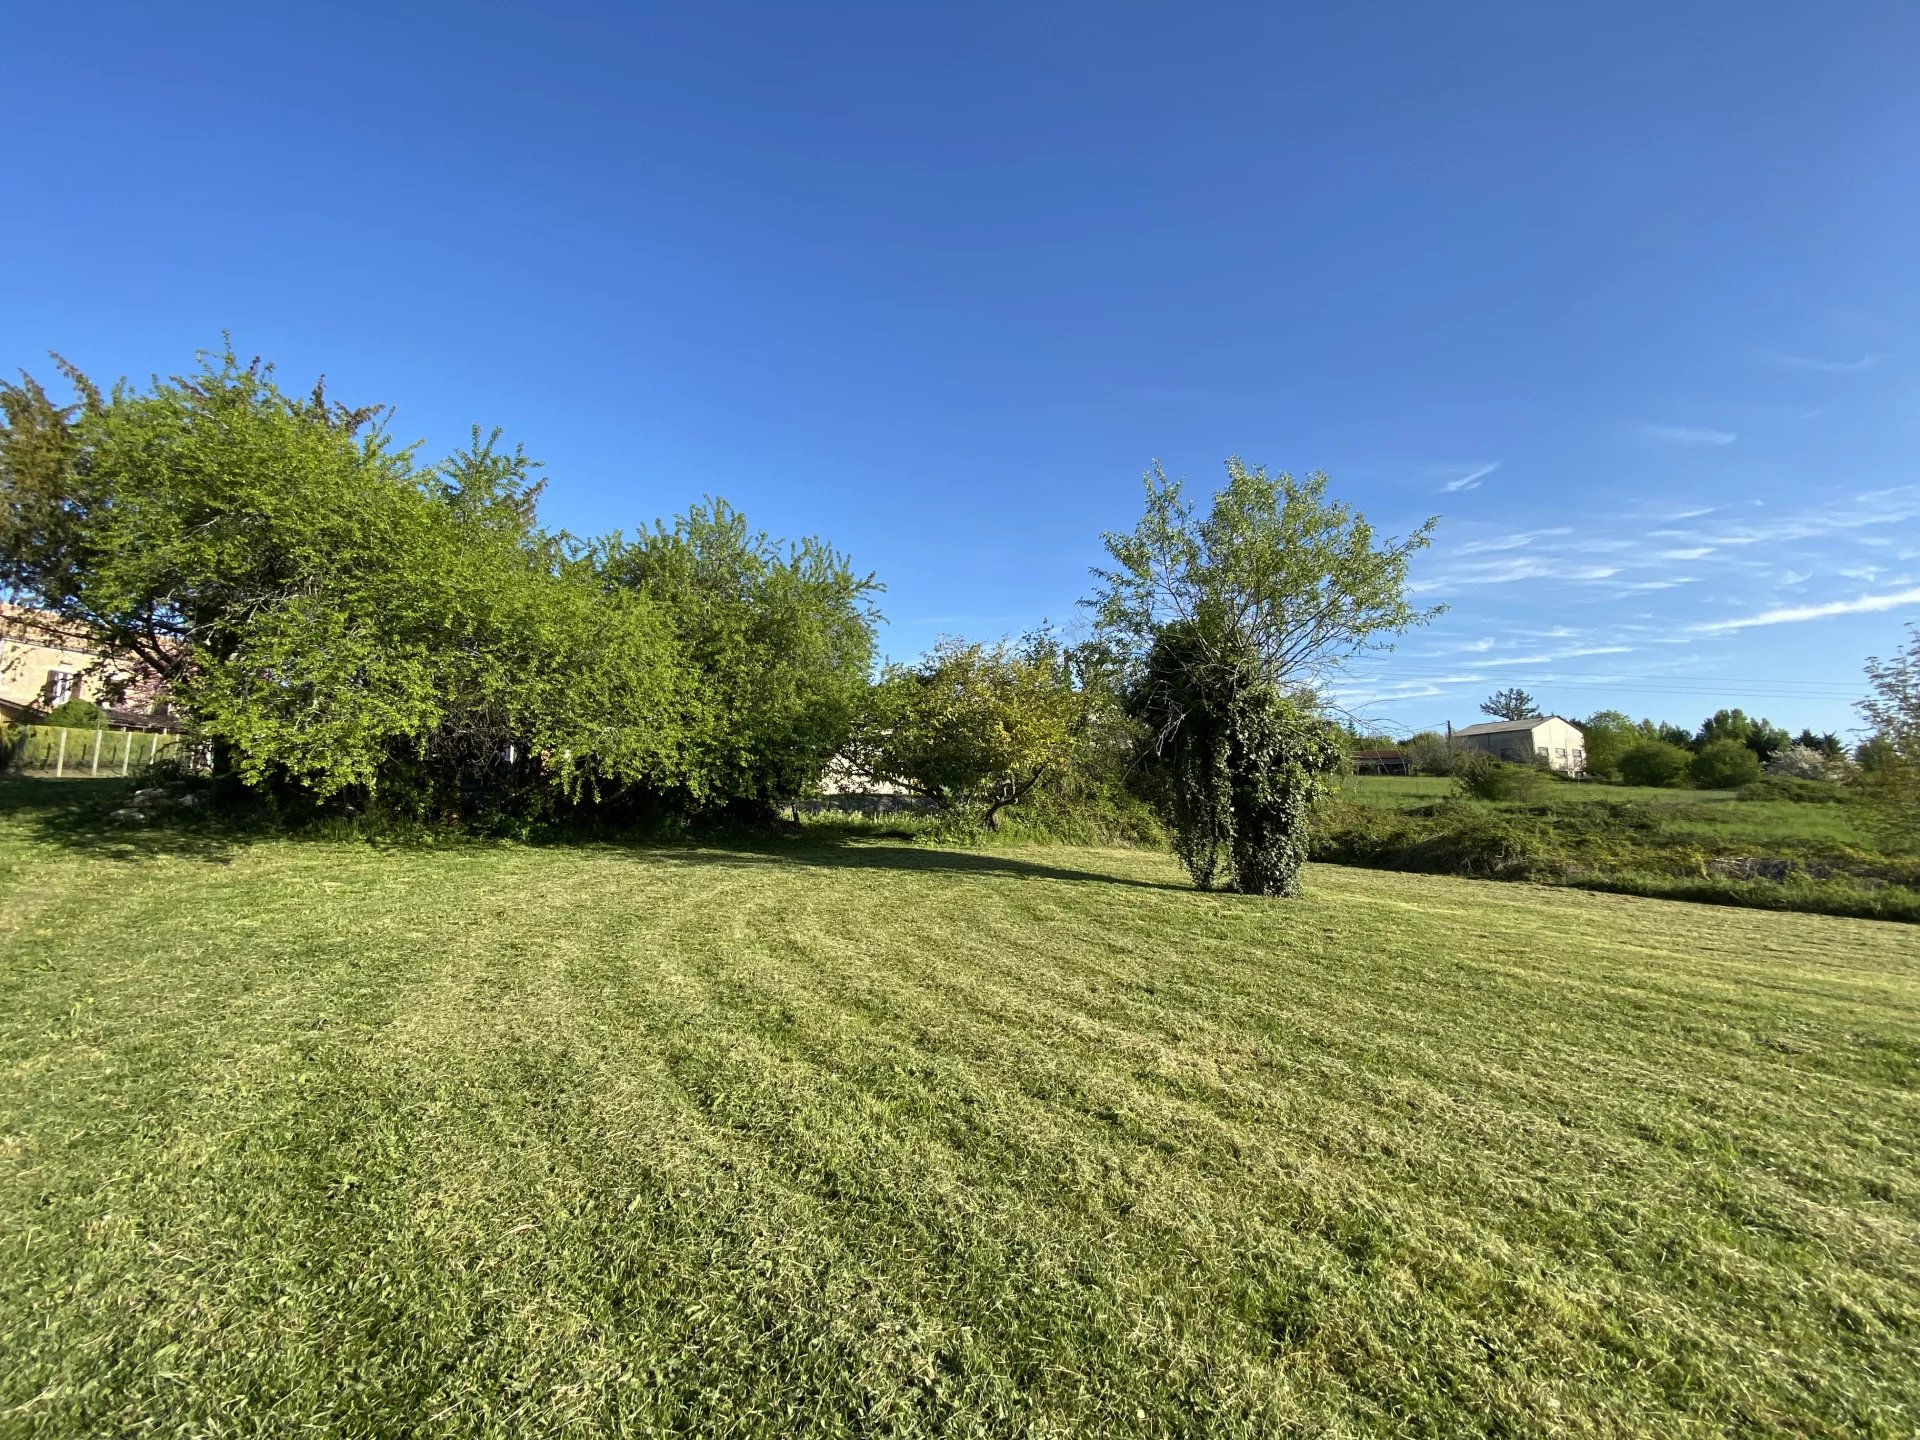 Nice plot of land ideally located in the bastide of Monflanquin